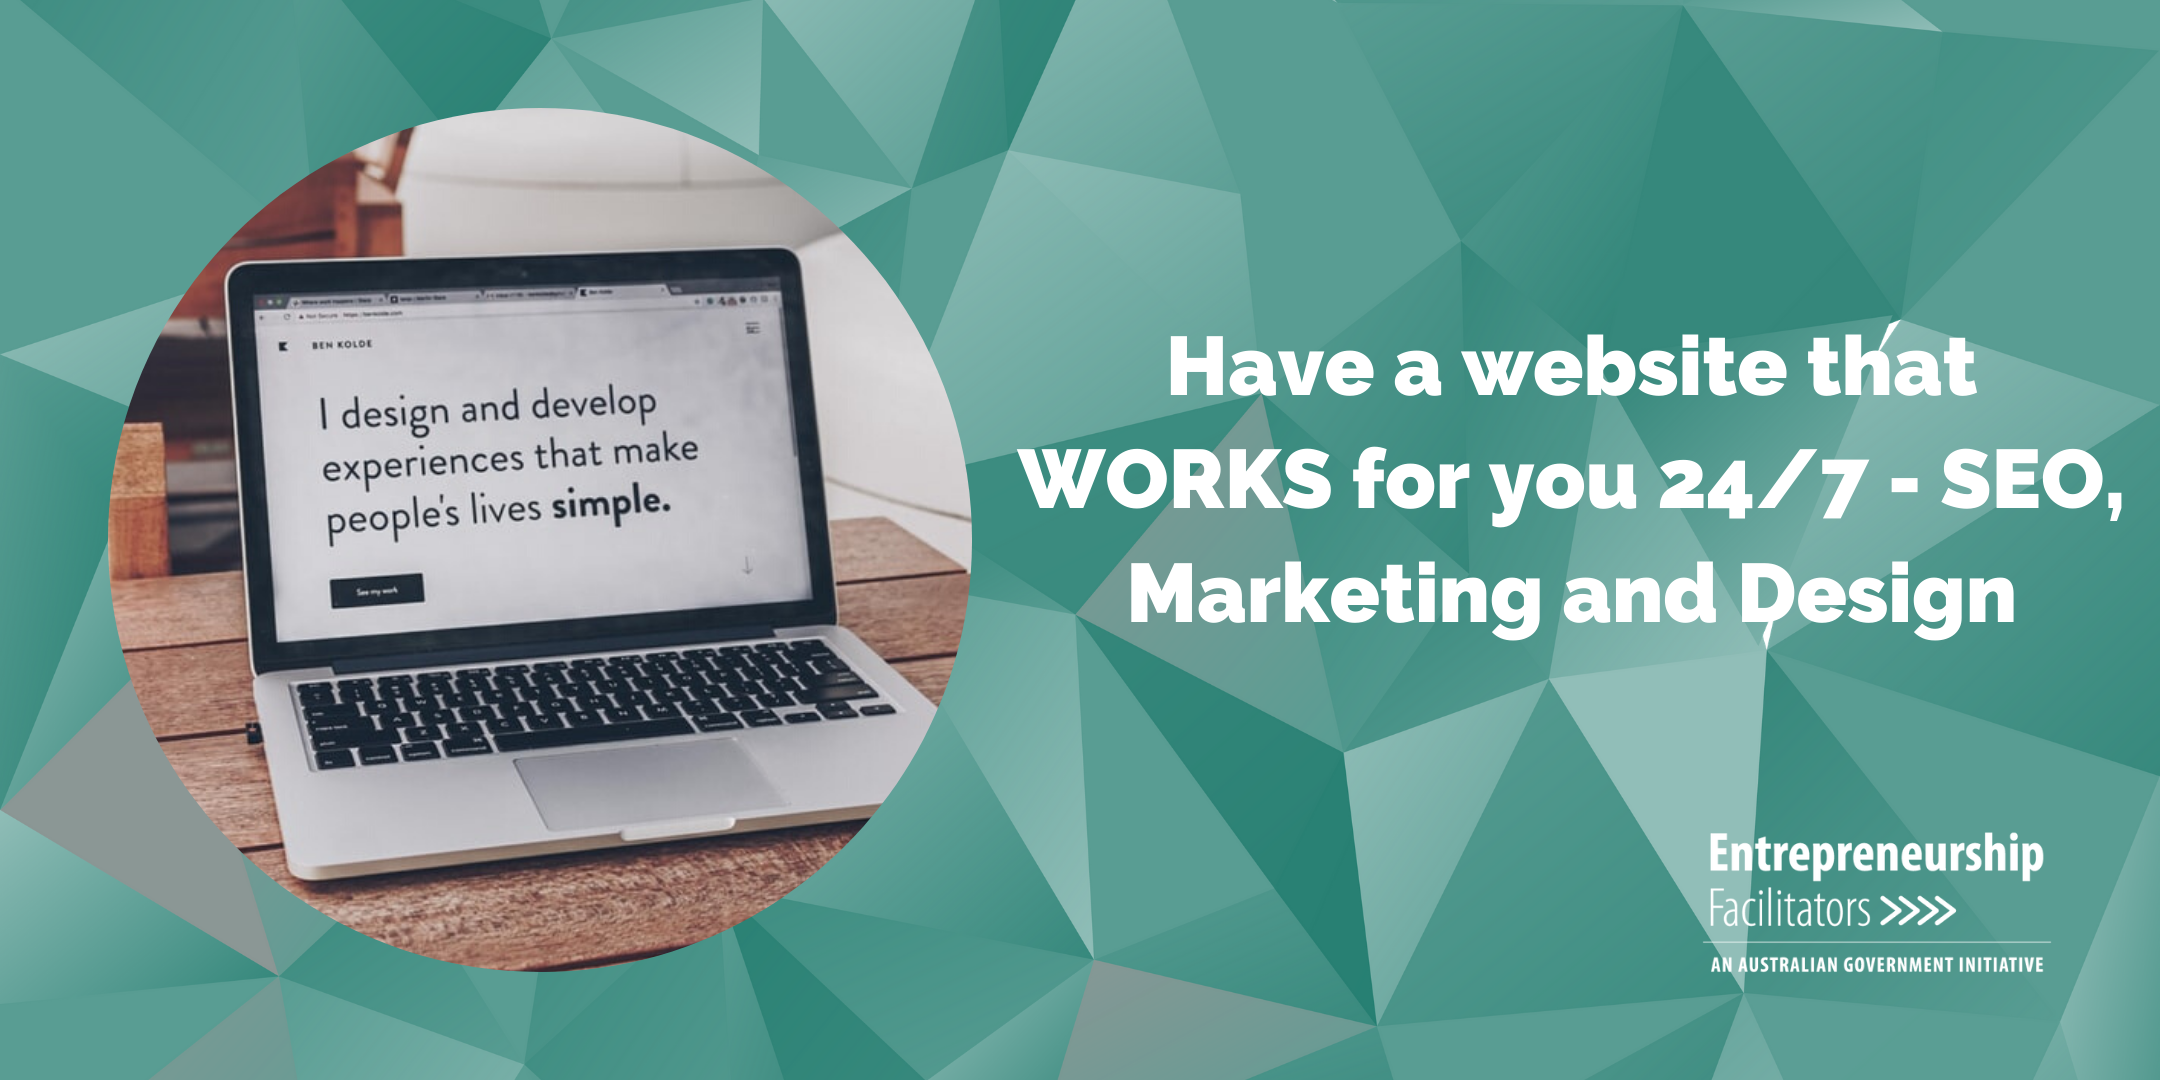 Have a website that WORKS for you 24/7 - SEO, Marketing and Design